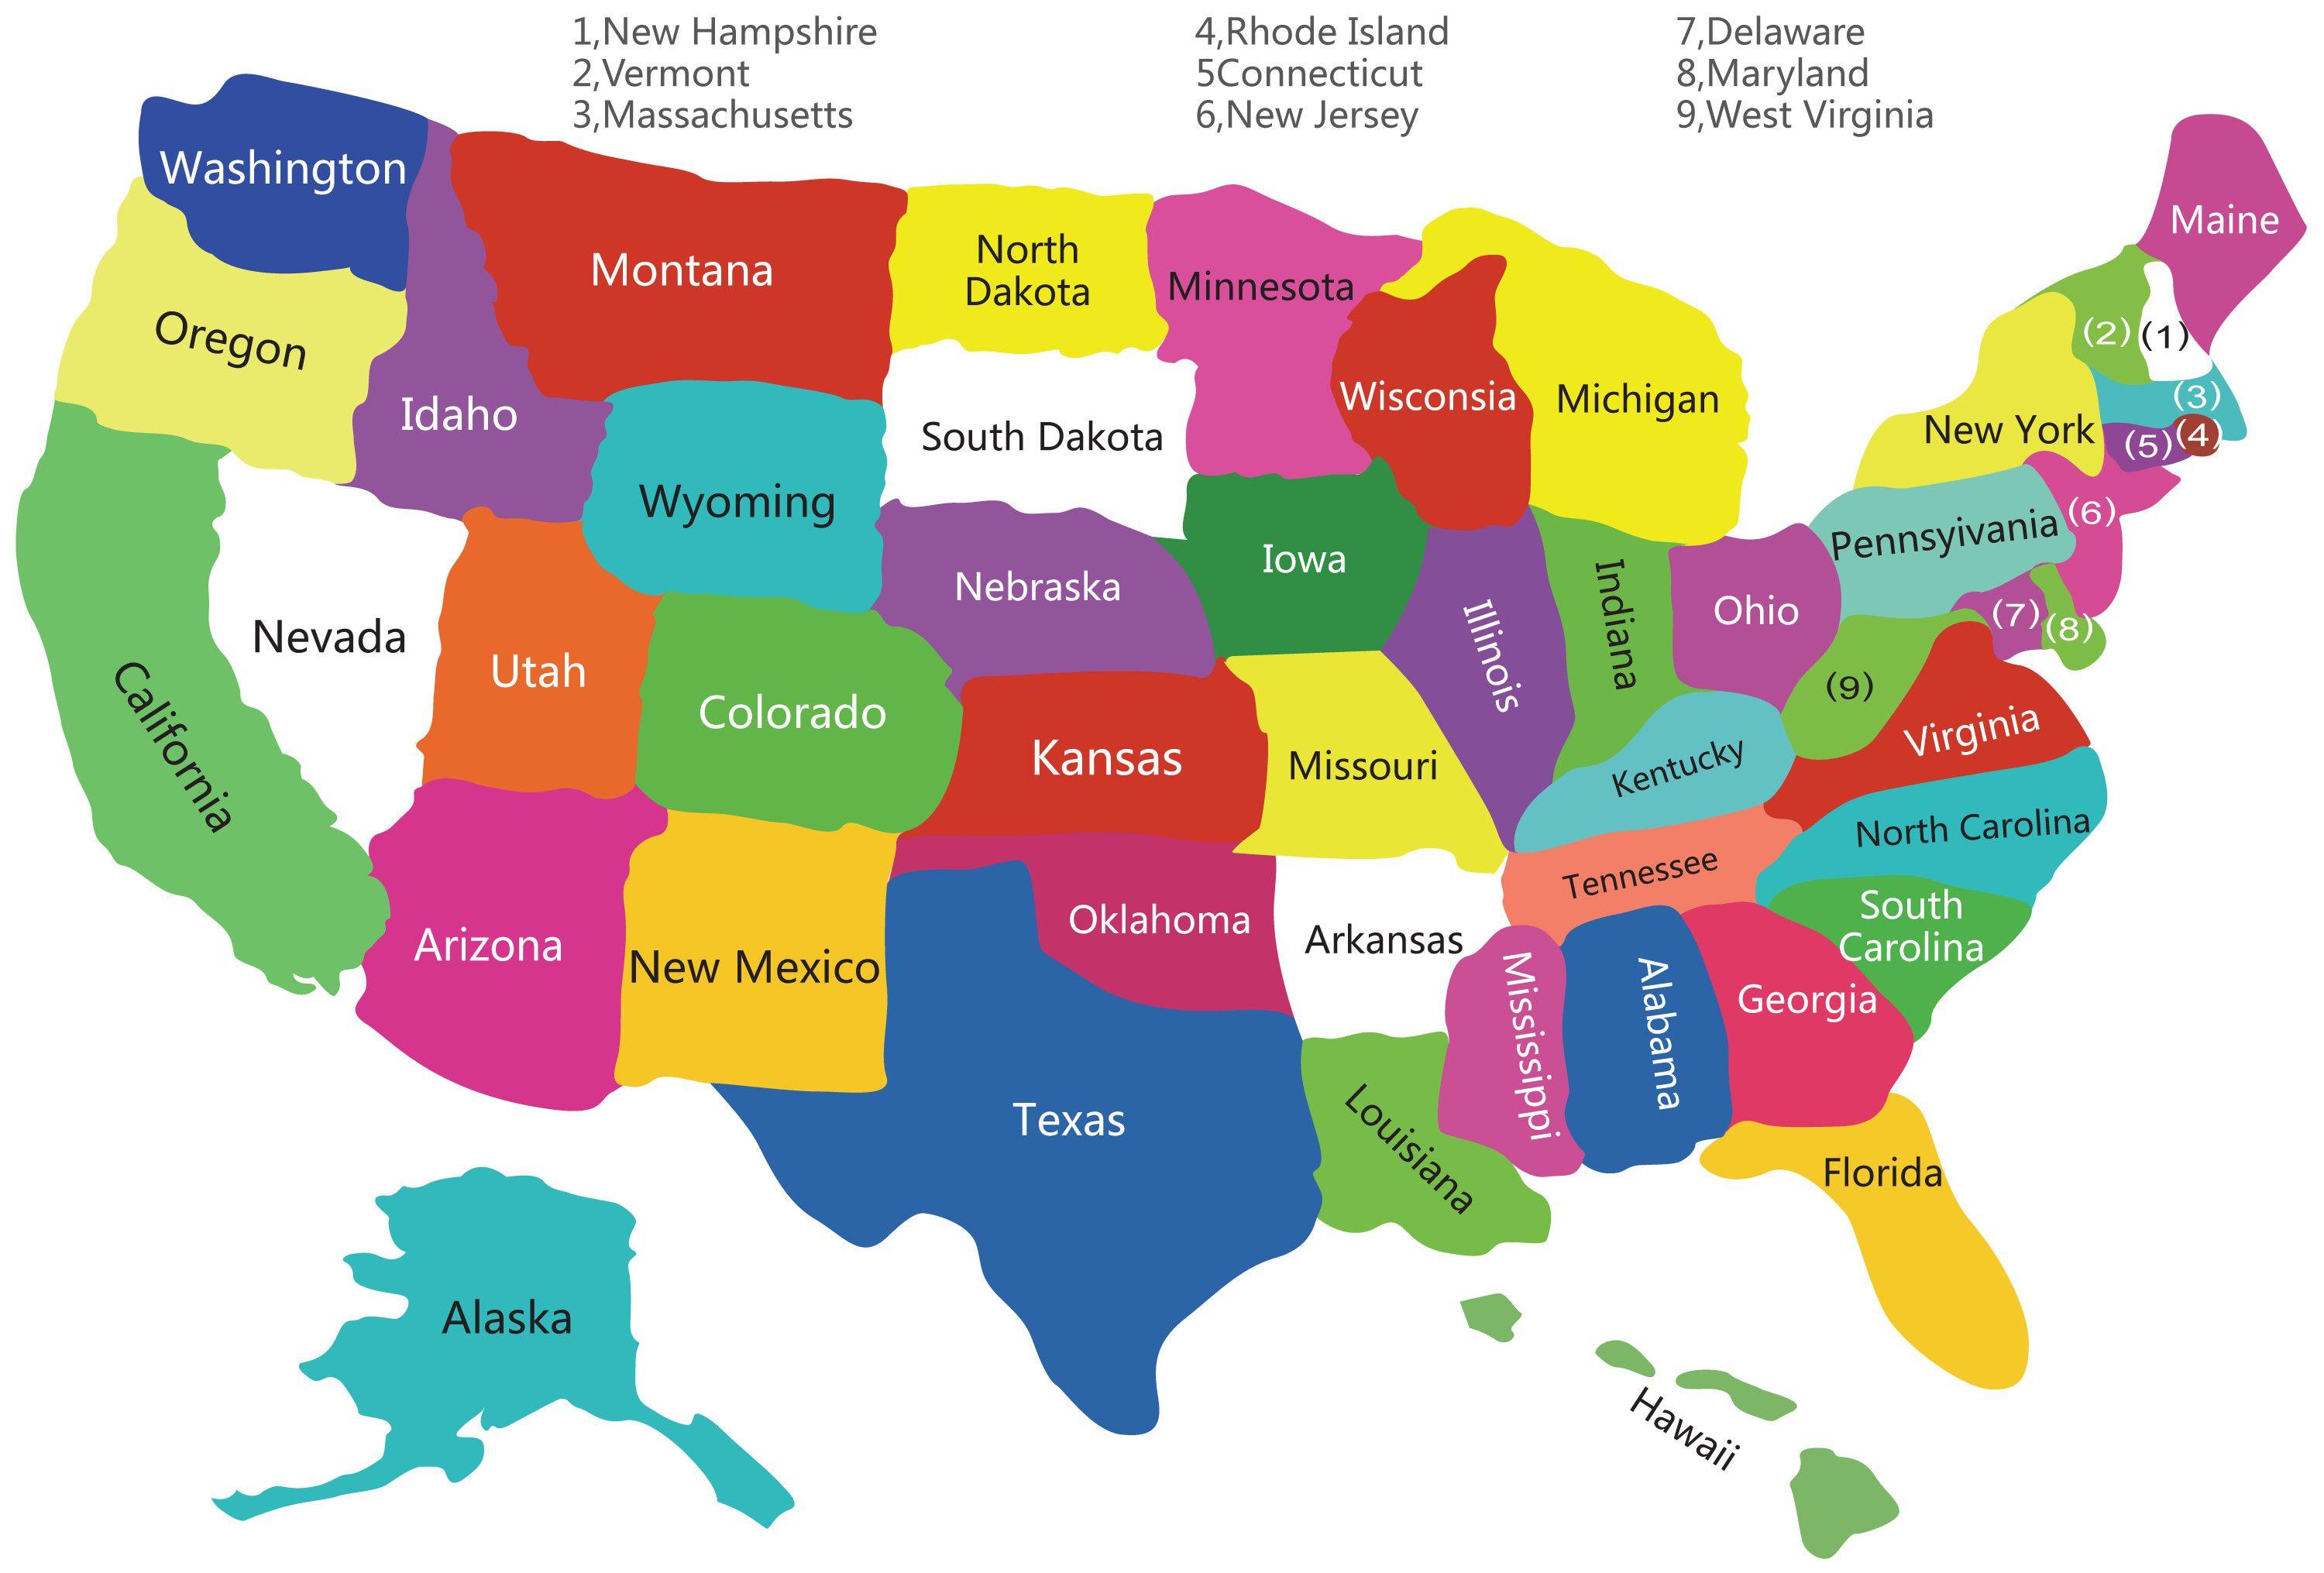 United States Of America Map